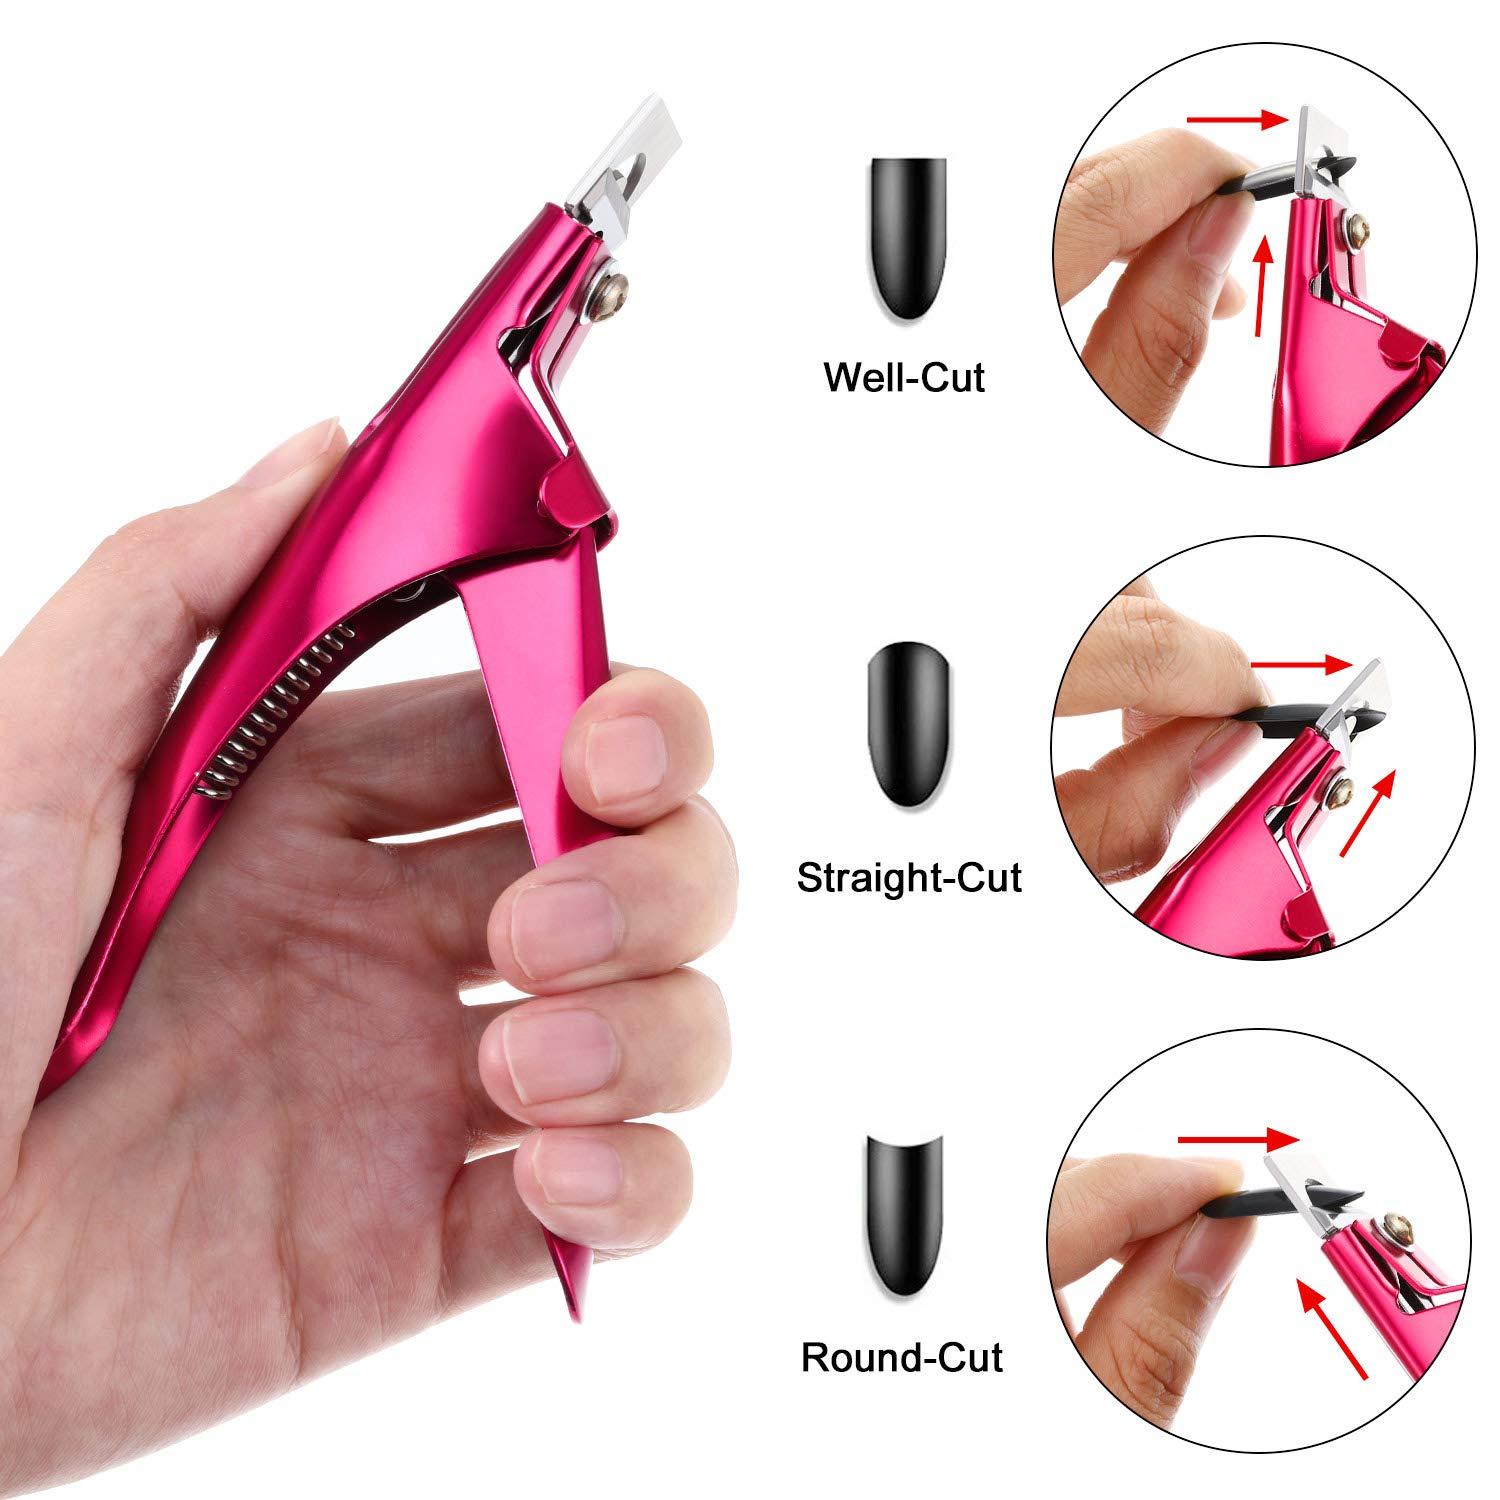 Stainless Steel Nail Clipper Set, Professional Manicure And Pedicure Kit,  Nail Scissors Portable Travel Facial And Nails Care Set 19 Pcs - Walmart.com